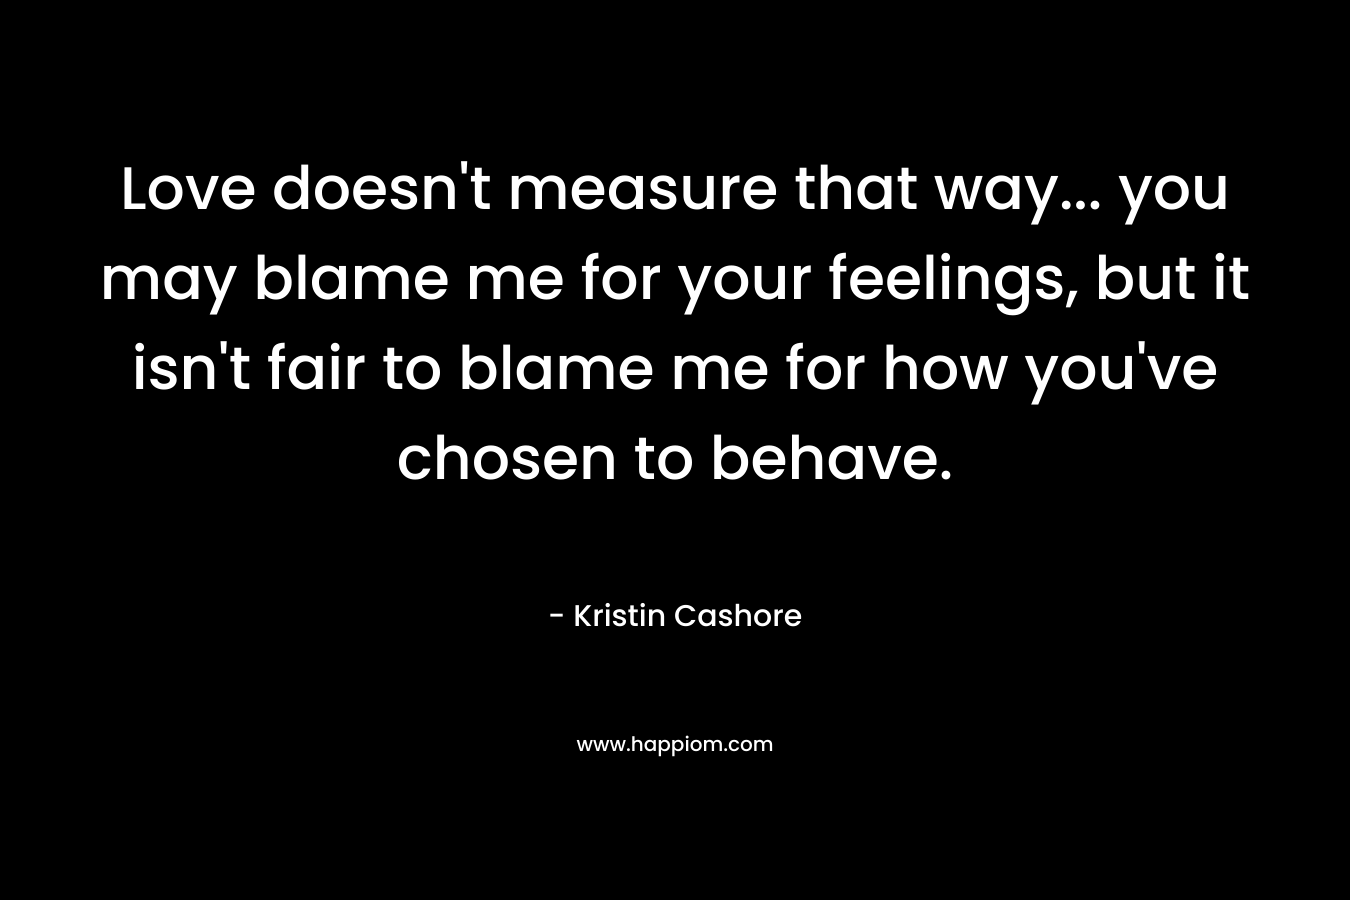 Love doesn't measure that way... you may blame me for your feelings, but it isn't fair to blame me for how you've chosen to behave.